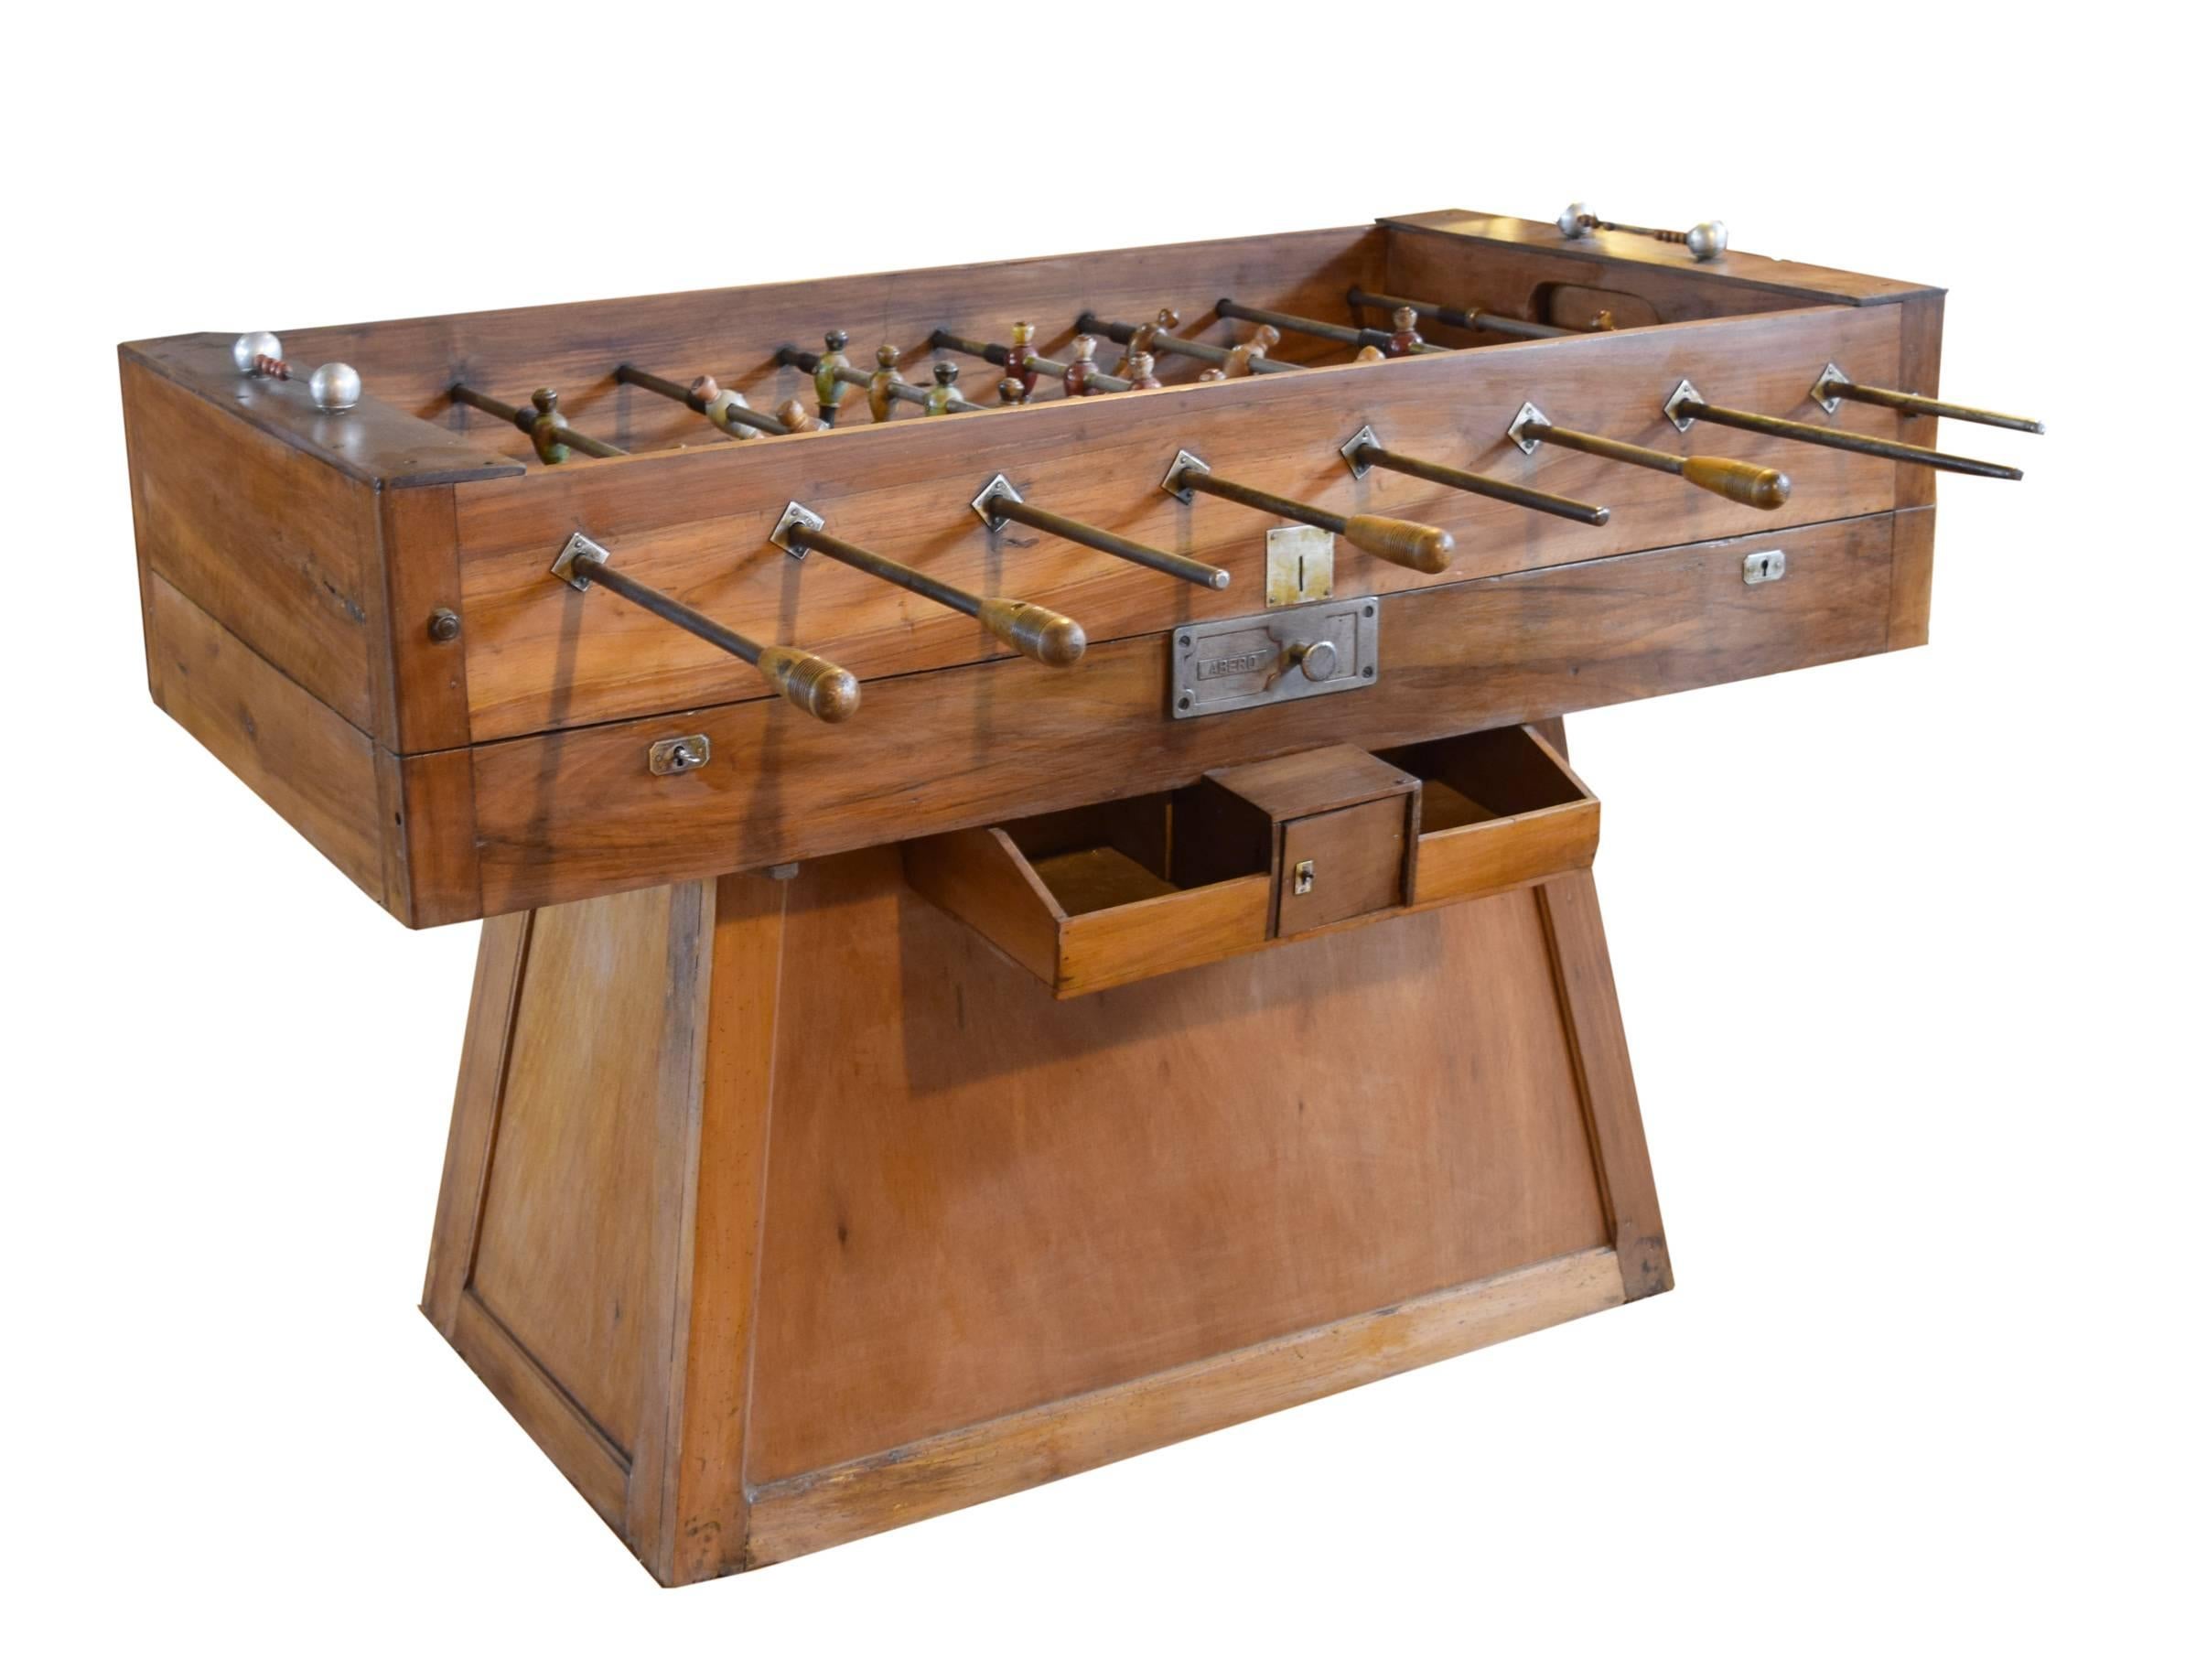 A coin operated wood foosball table from Italy. This circa 1930s table is an early example of a foosball table given that they were first invented in 1922. The original wooden players are painted red, green and white.